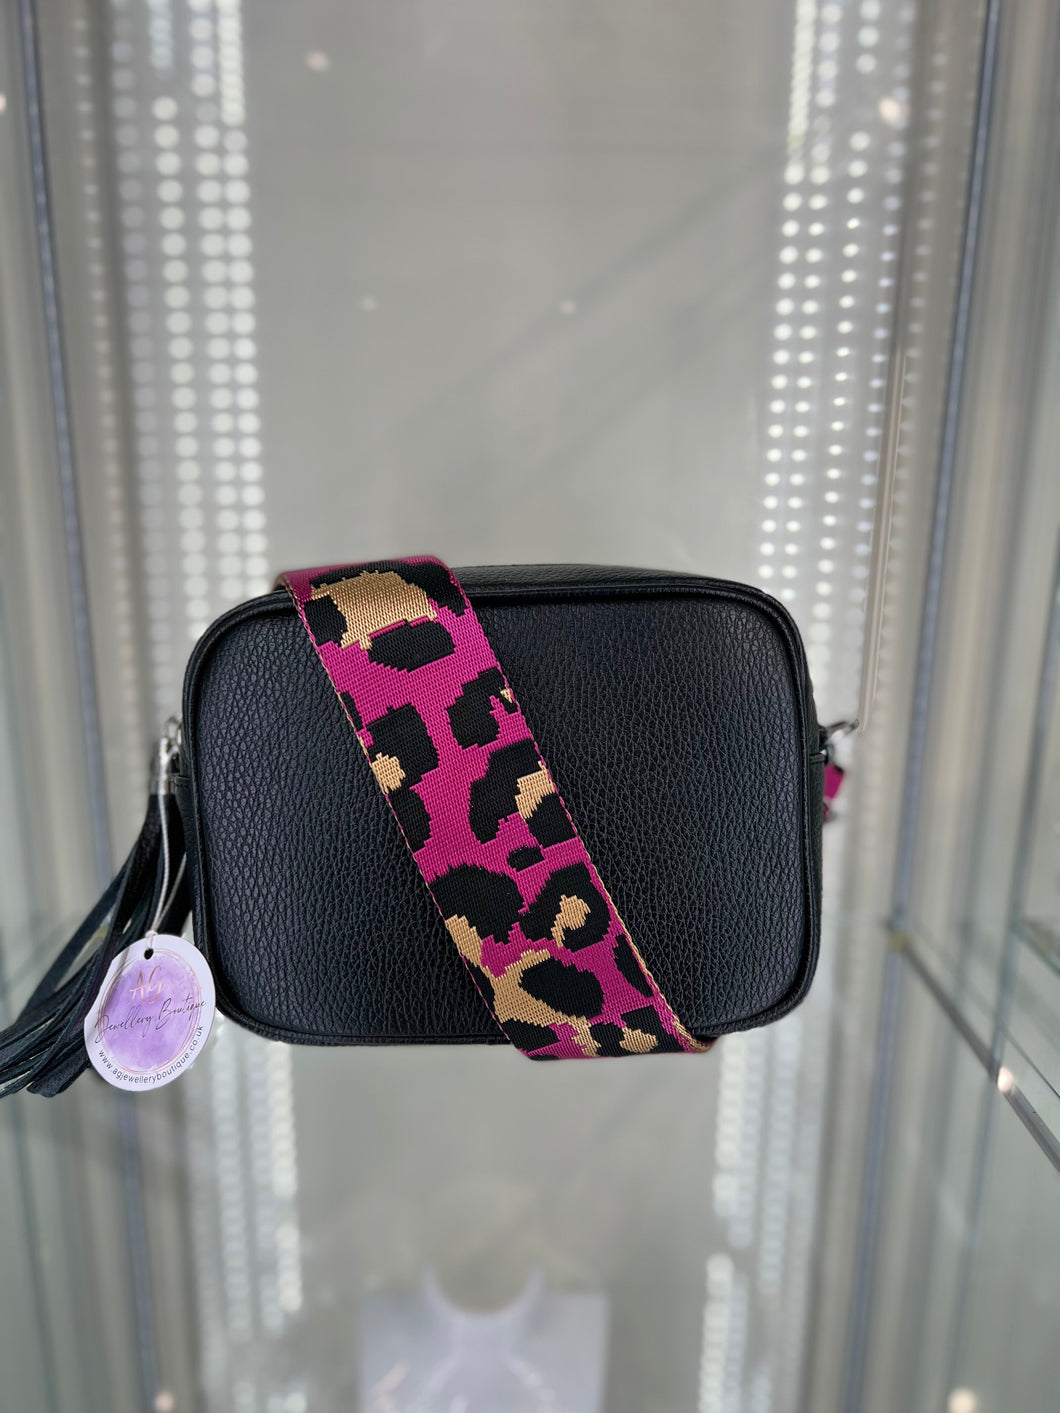 Real leather Black Crossbody bag with Pink Leopard Print Strap